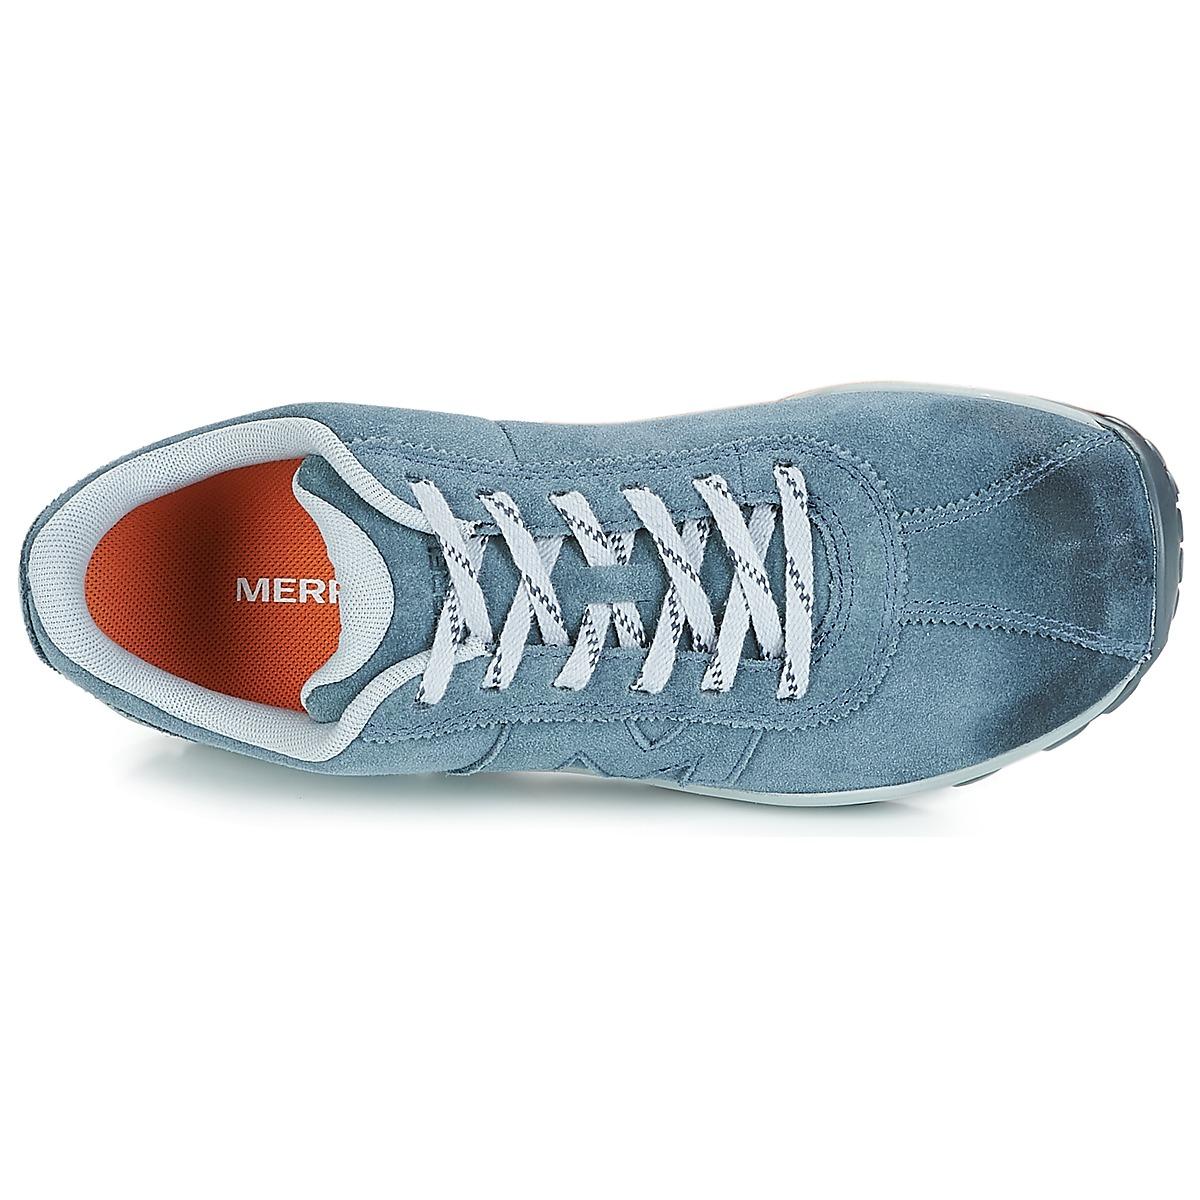 Merrell Sprint Lace Suede Ac+ Shoes (trainers) in Blue for Men - Lyst